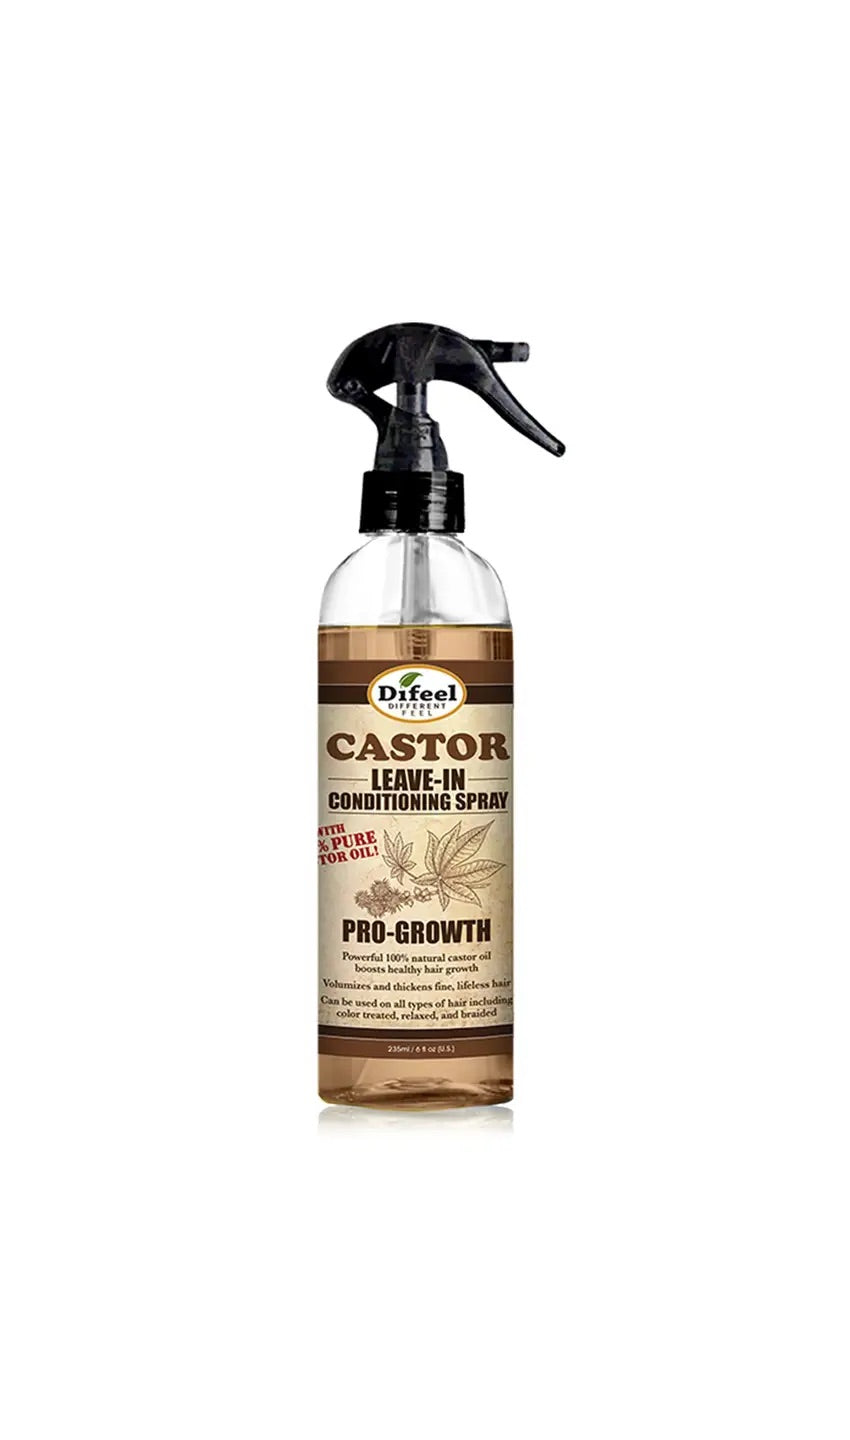 Difeel Pro Growth Castor Leave In Conditioning Spray 6 oz